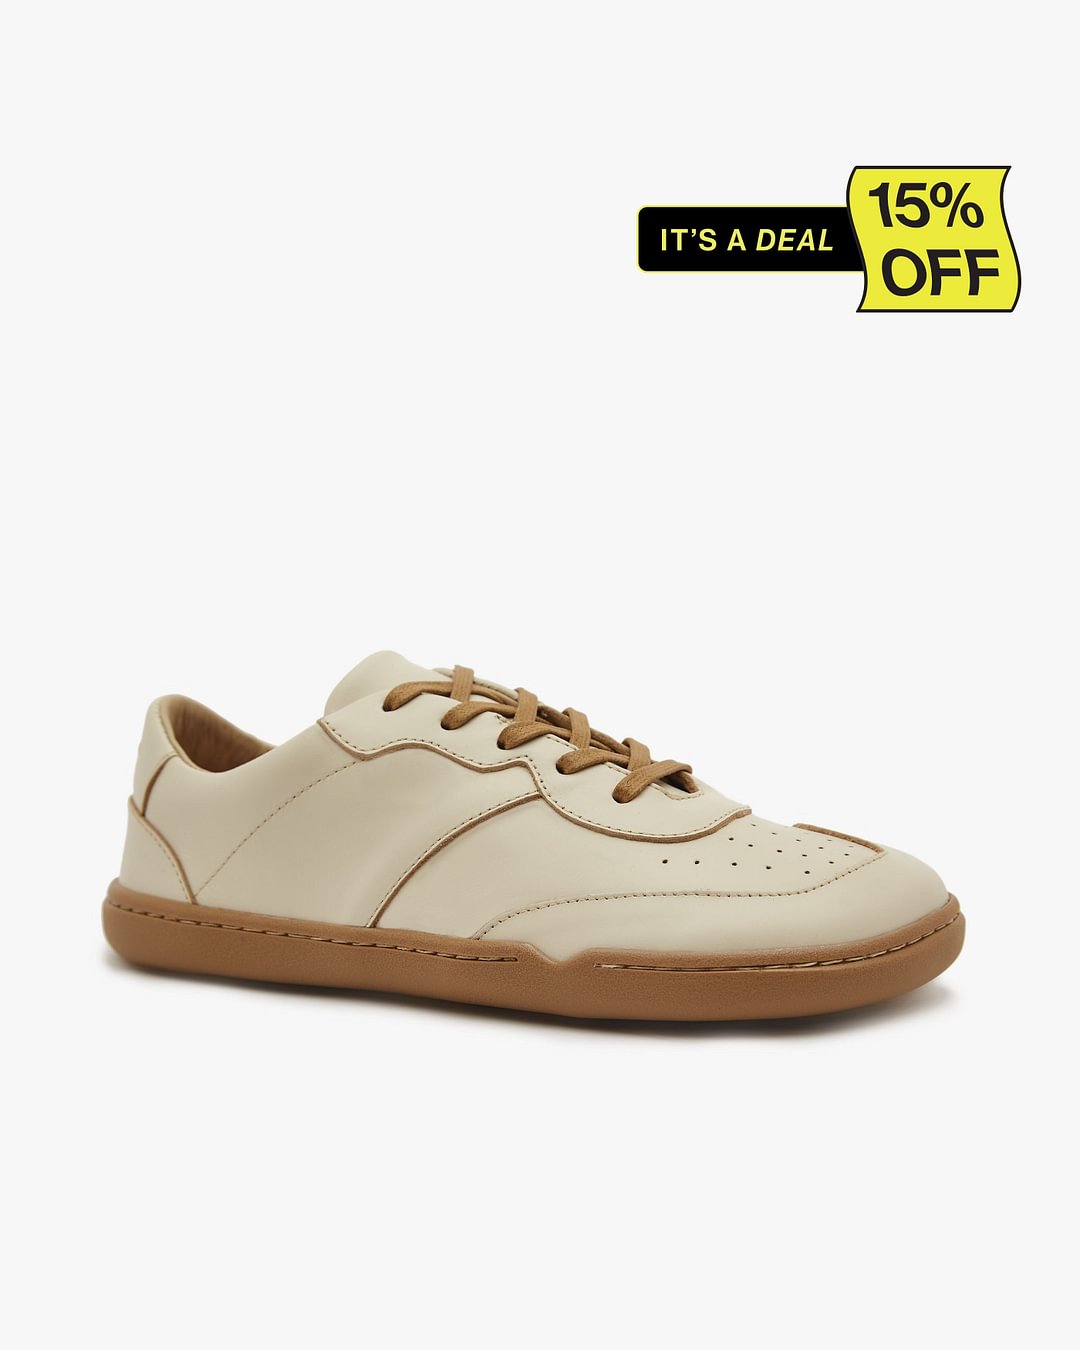 The Retro Sneaker in Natural Leather Women